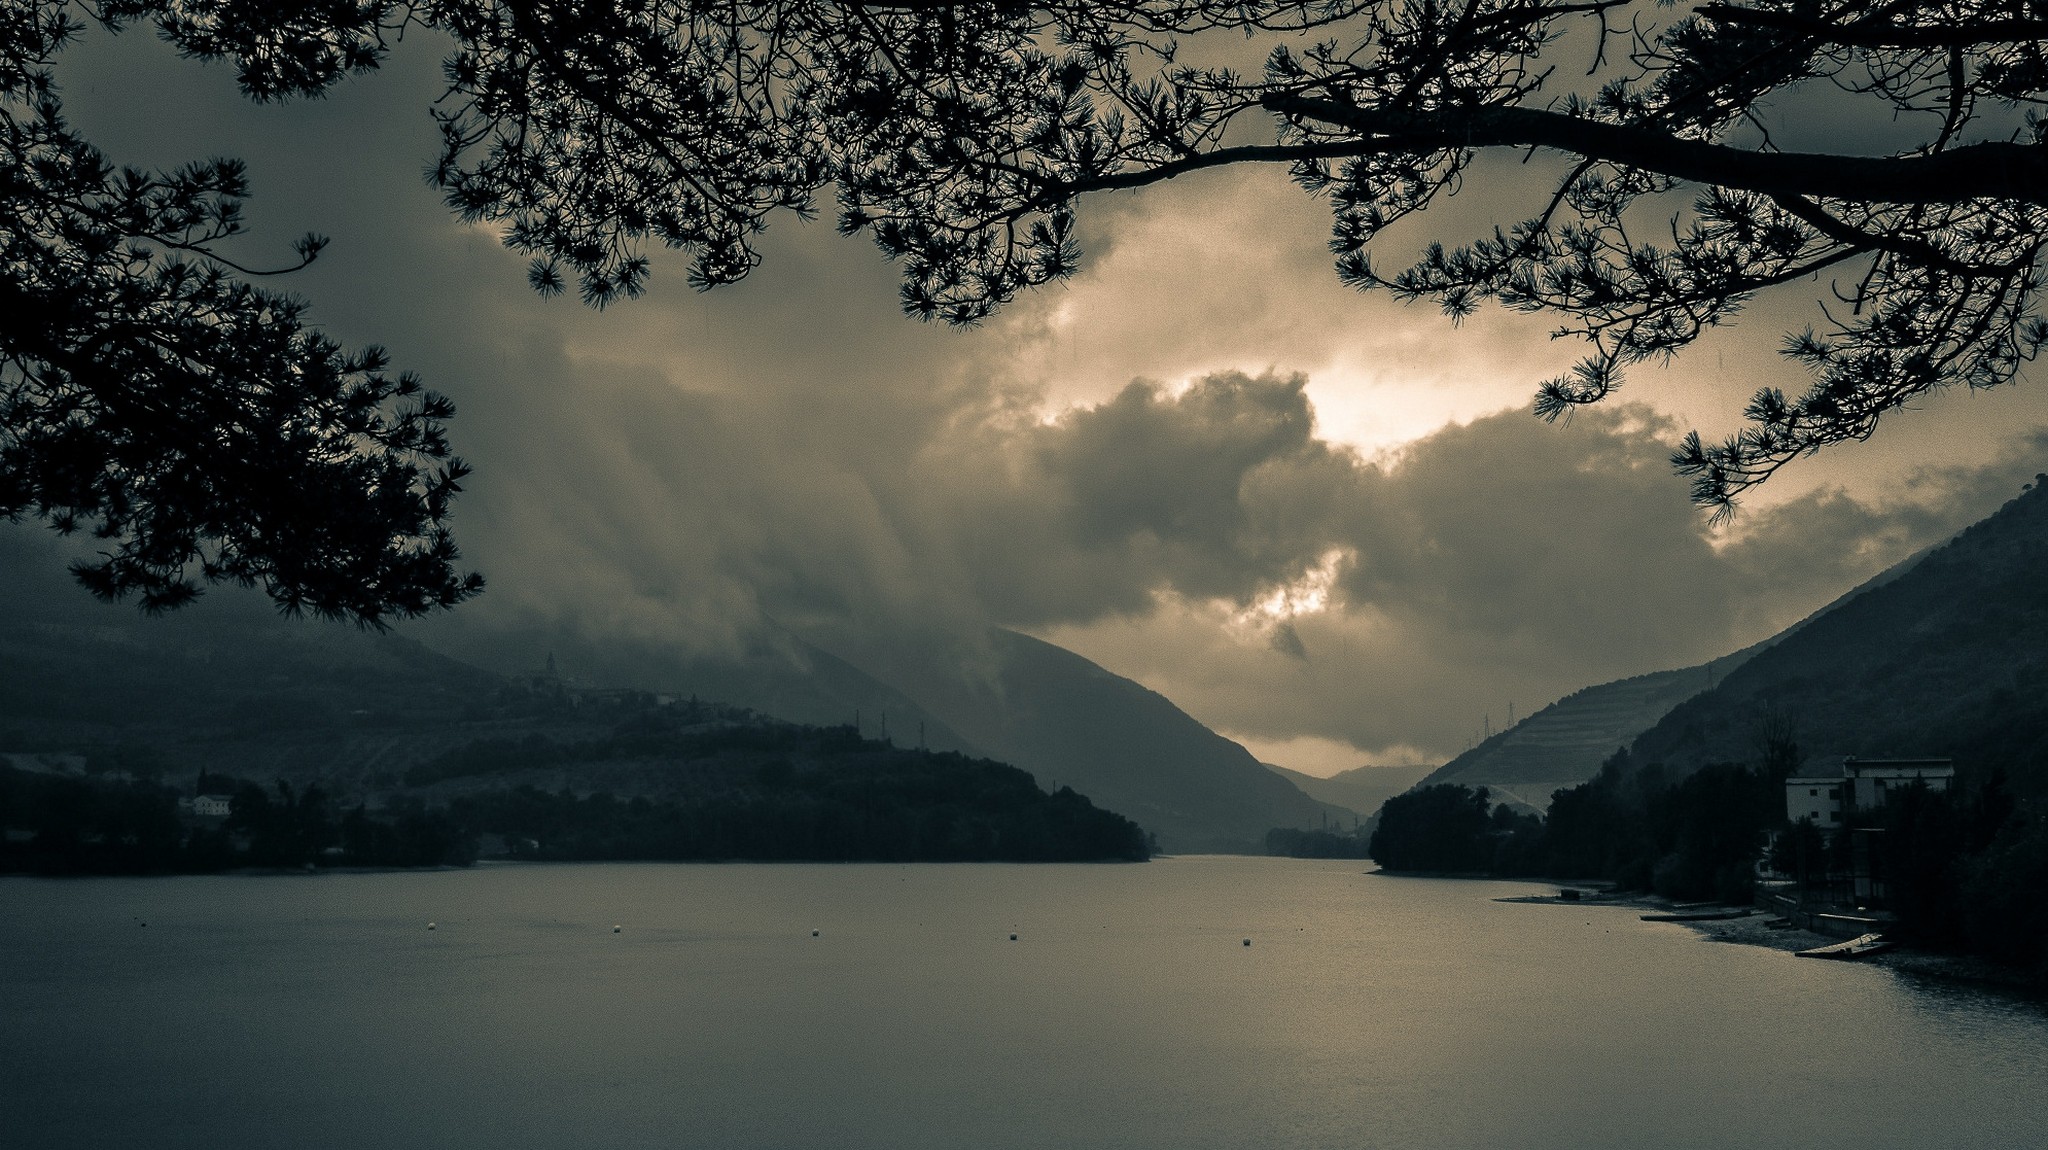 General 2048x1150 landscape nature lake mountains dark clouds trees daylight building Italy far view